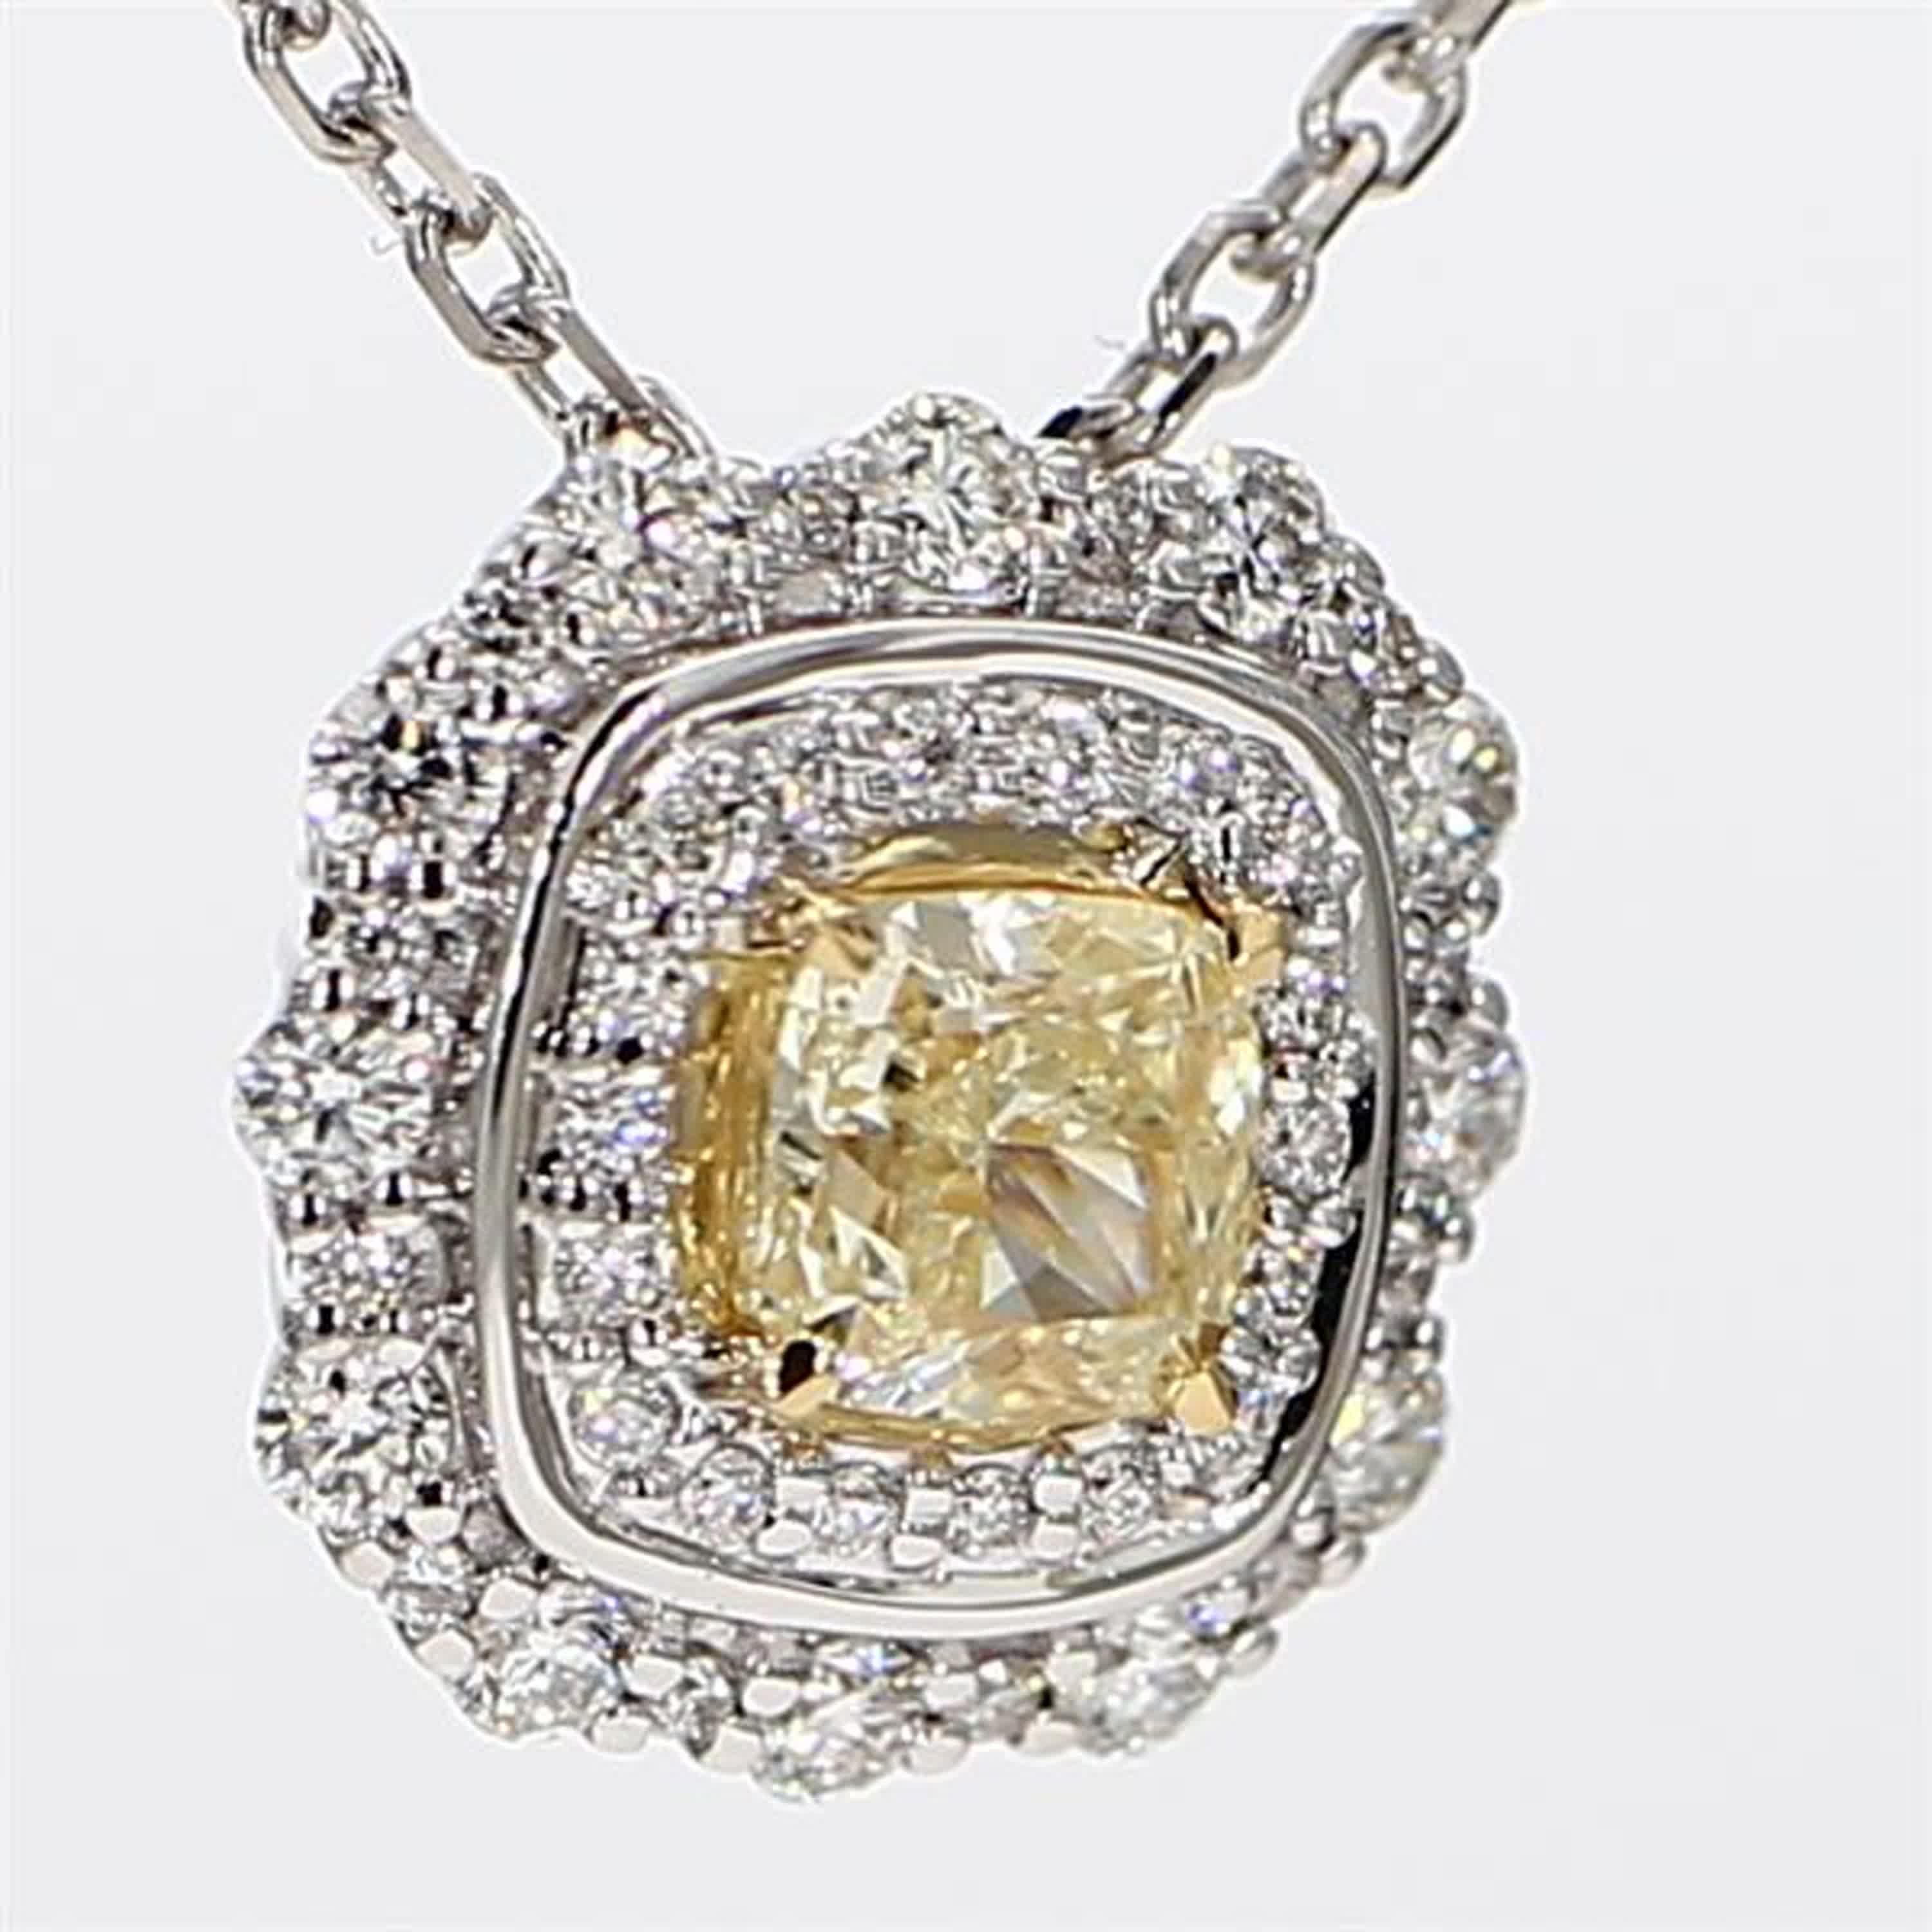 Natural Yellow Cushion and White Diamond 1.06 Carat TW Gold Drop Pendant For Sale 1